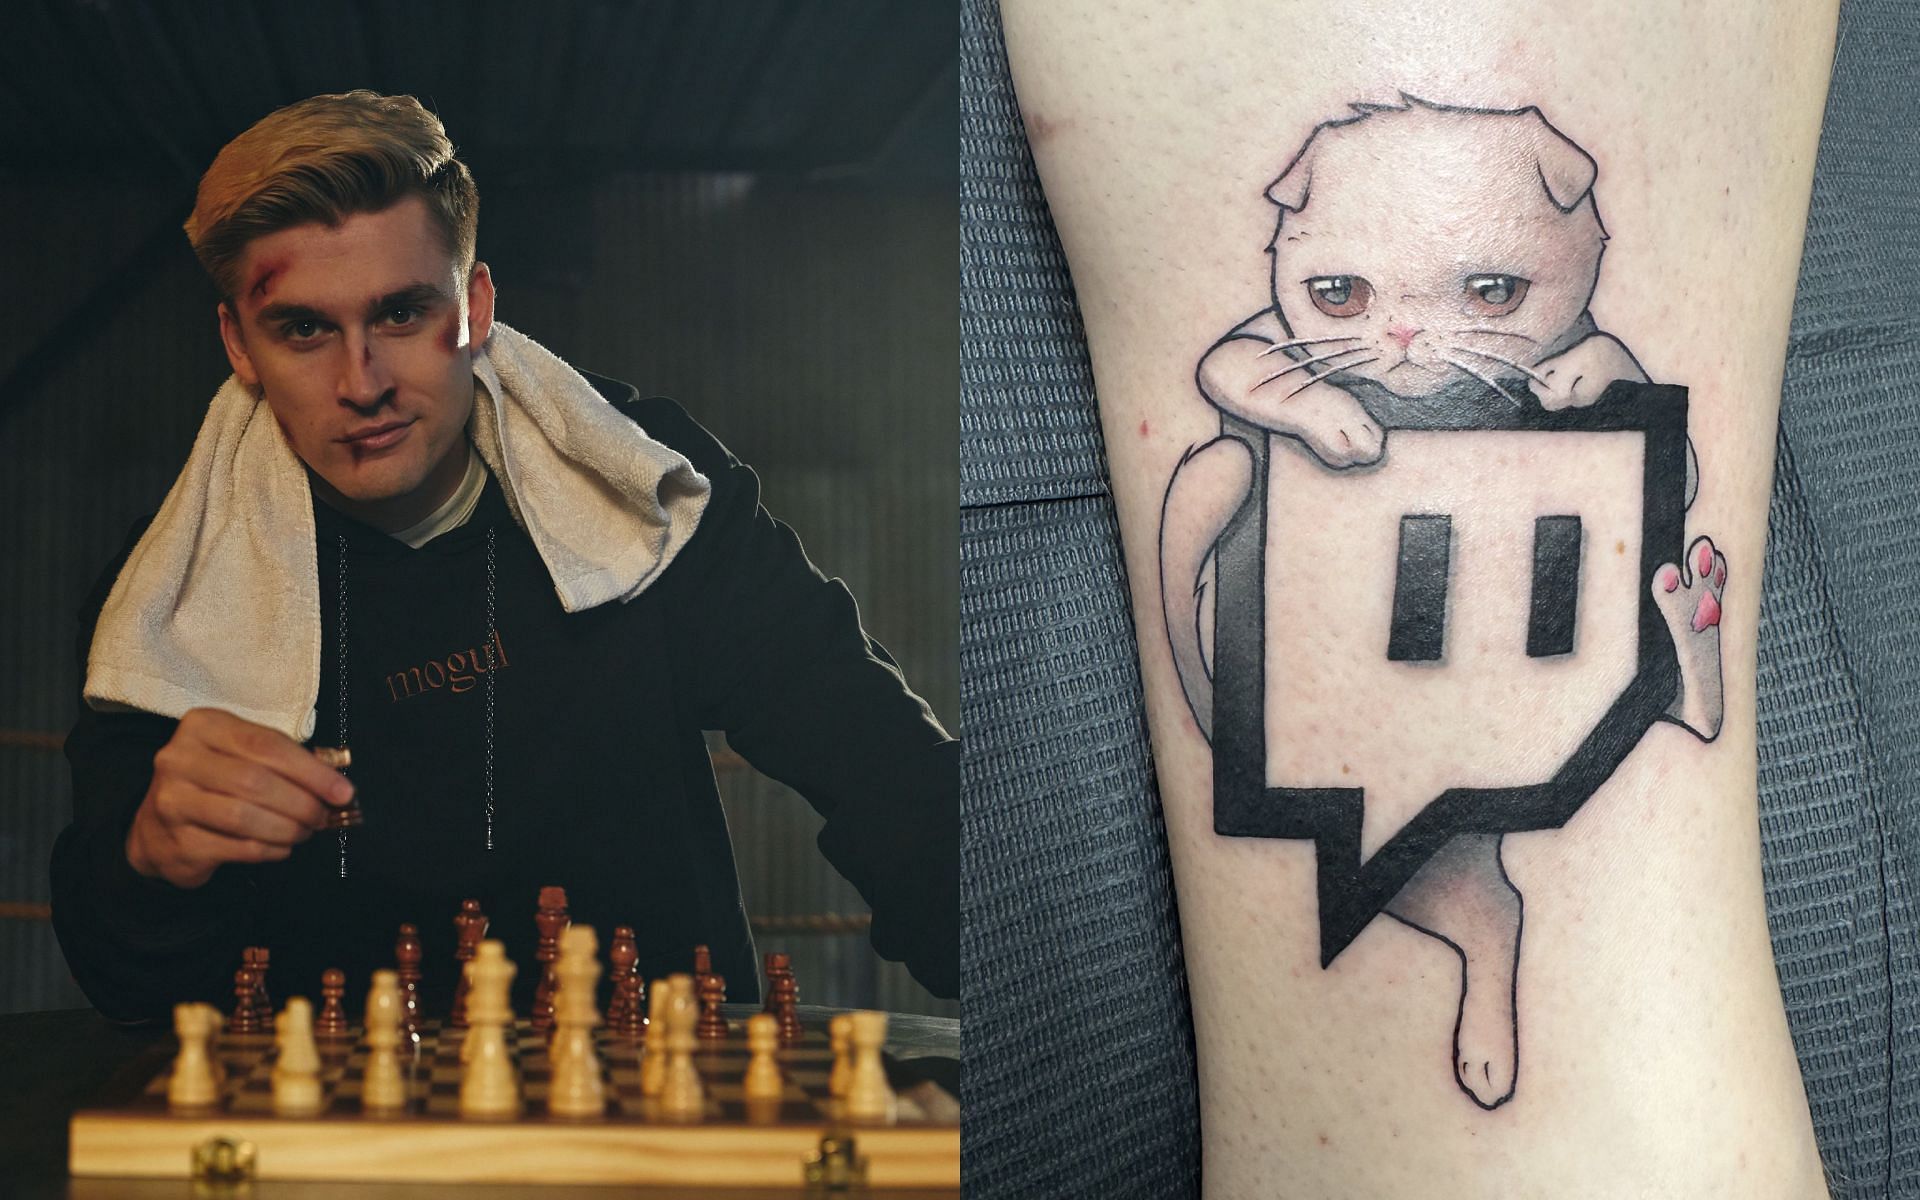 Ludwig livestreamed himself getting a Twitch-themed tattoo on December 7, 2022 (Images via Ludwig/Twitter)